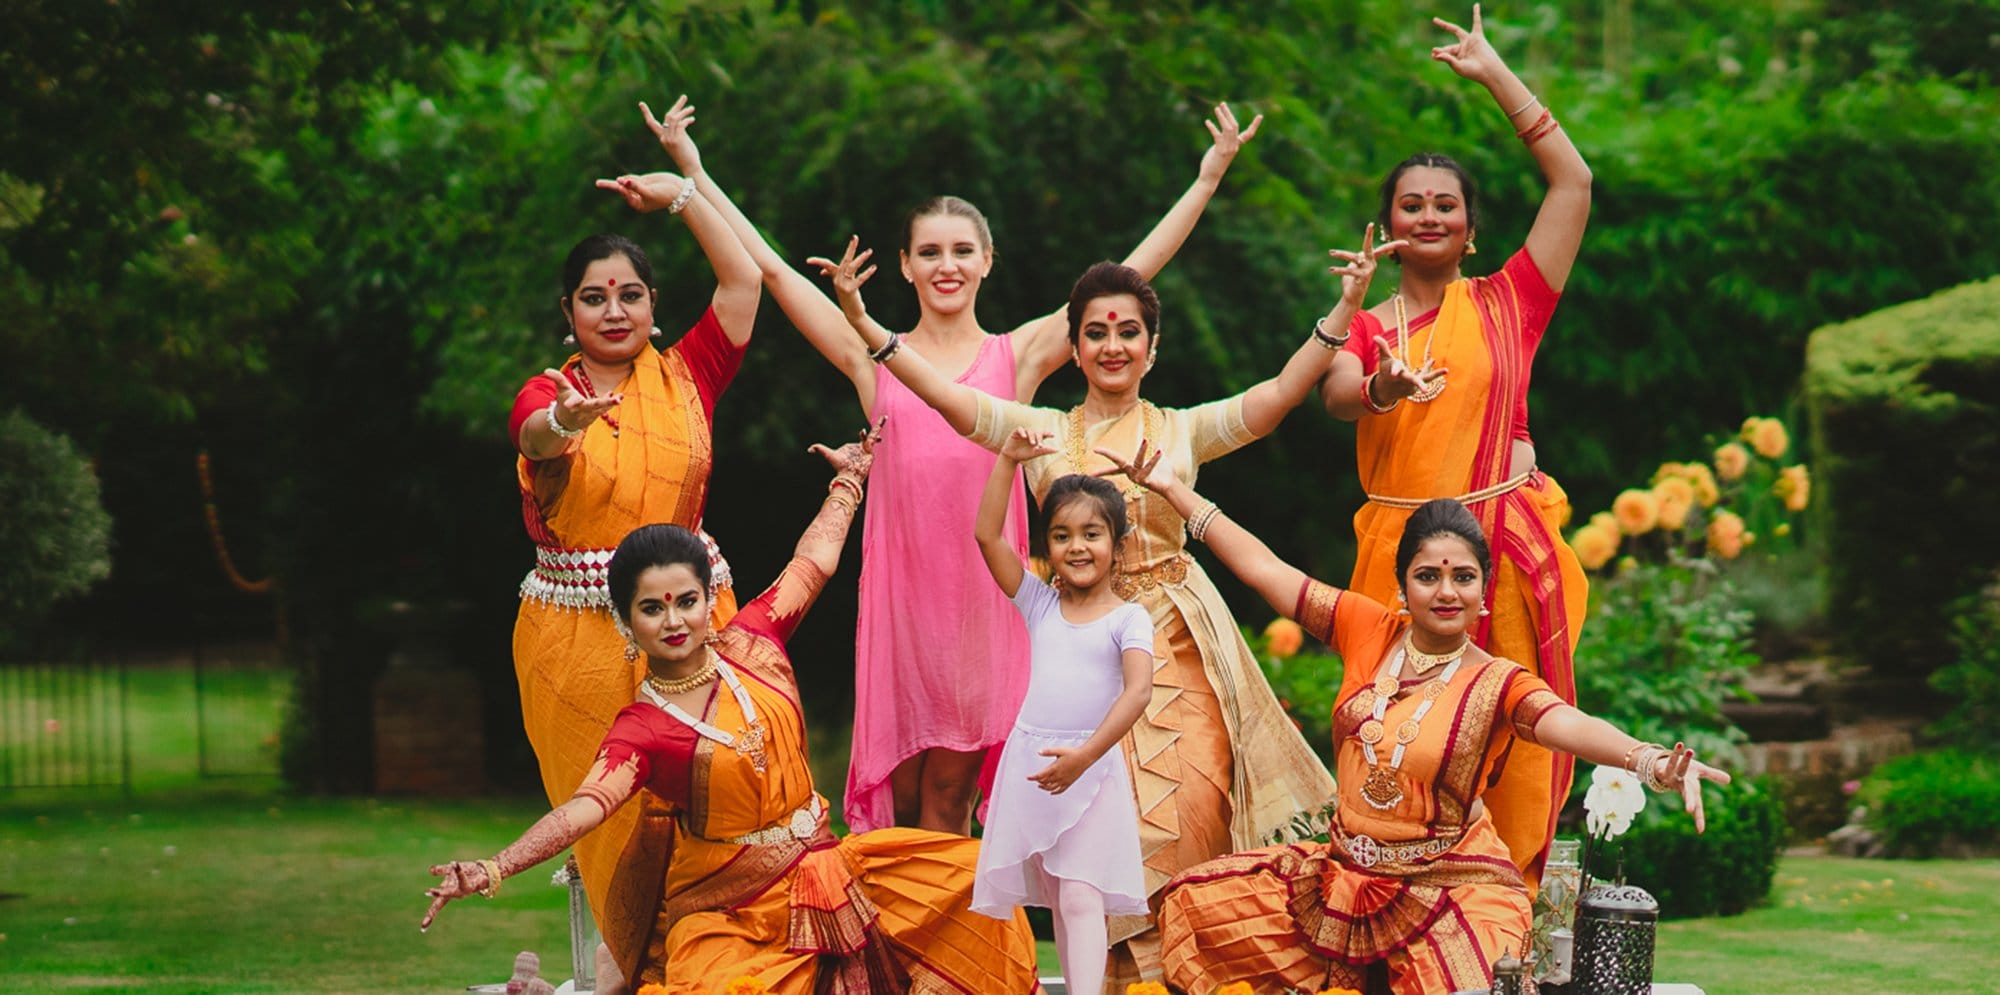 A group of women pose outdoors in traditional Bharatanatyam dance attire. The colour palette is vibrant red and orange. In the centre of the woman, a young child dancer smiles and poses.